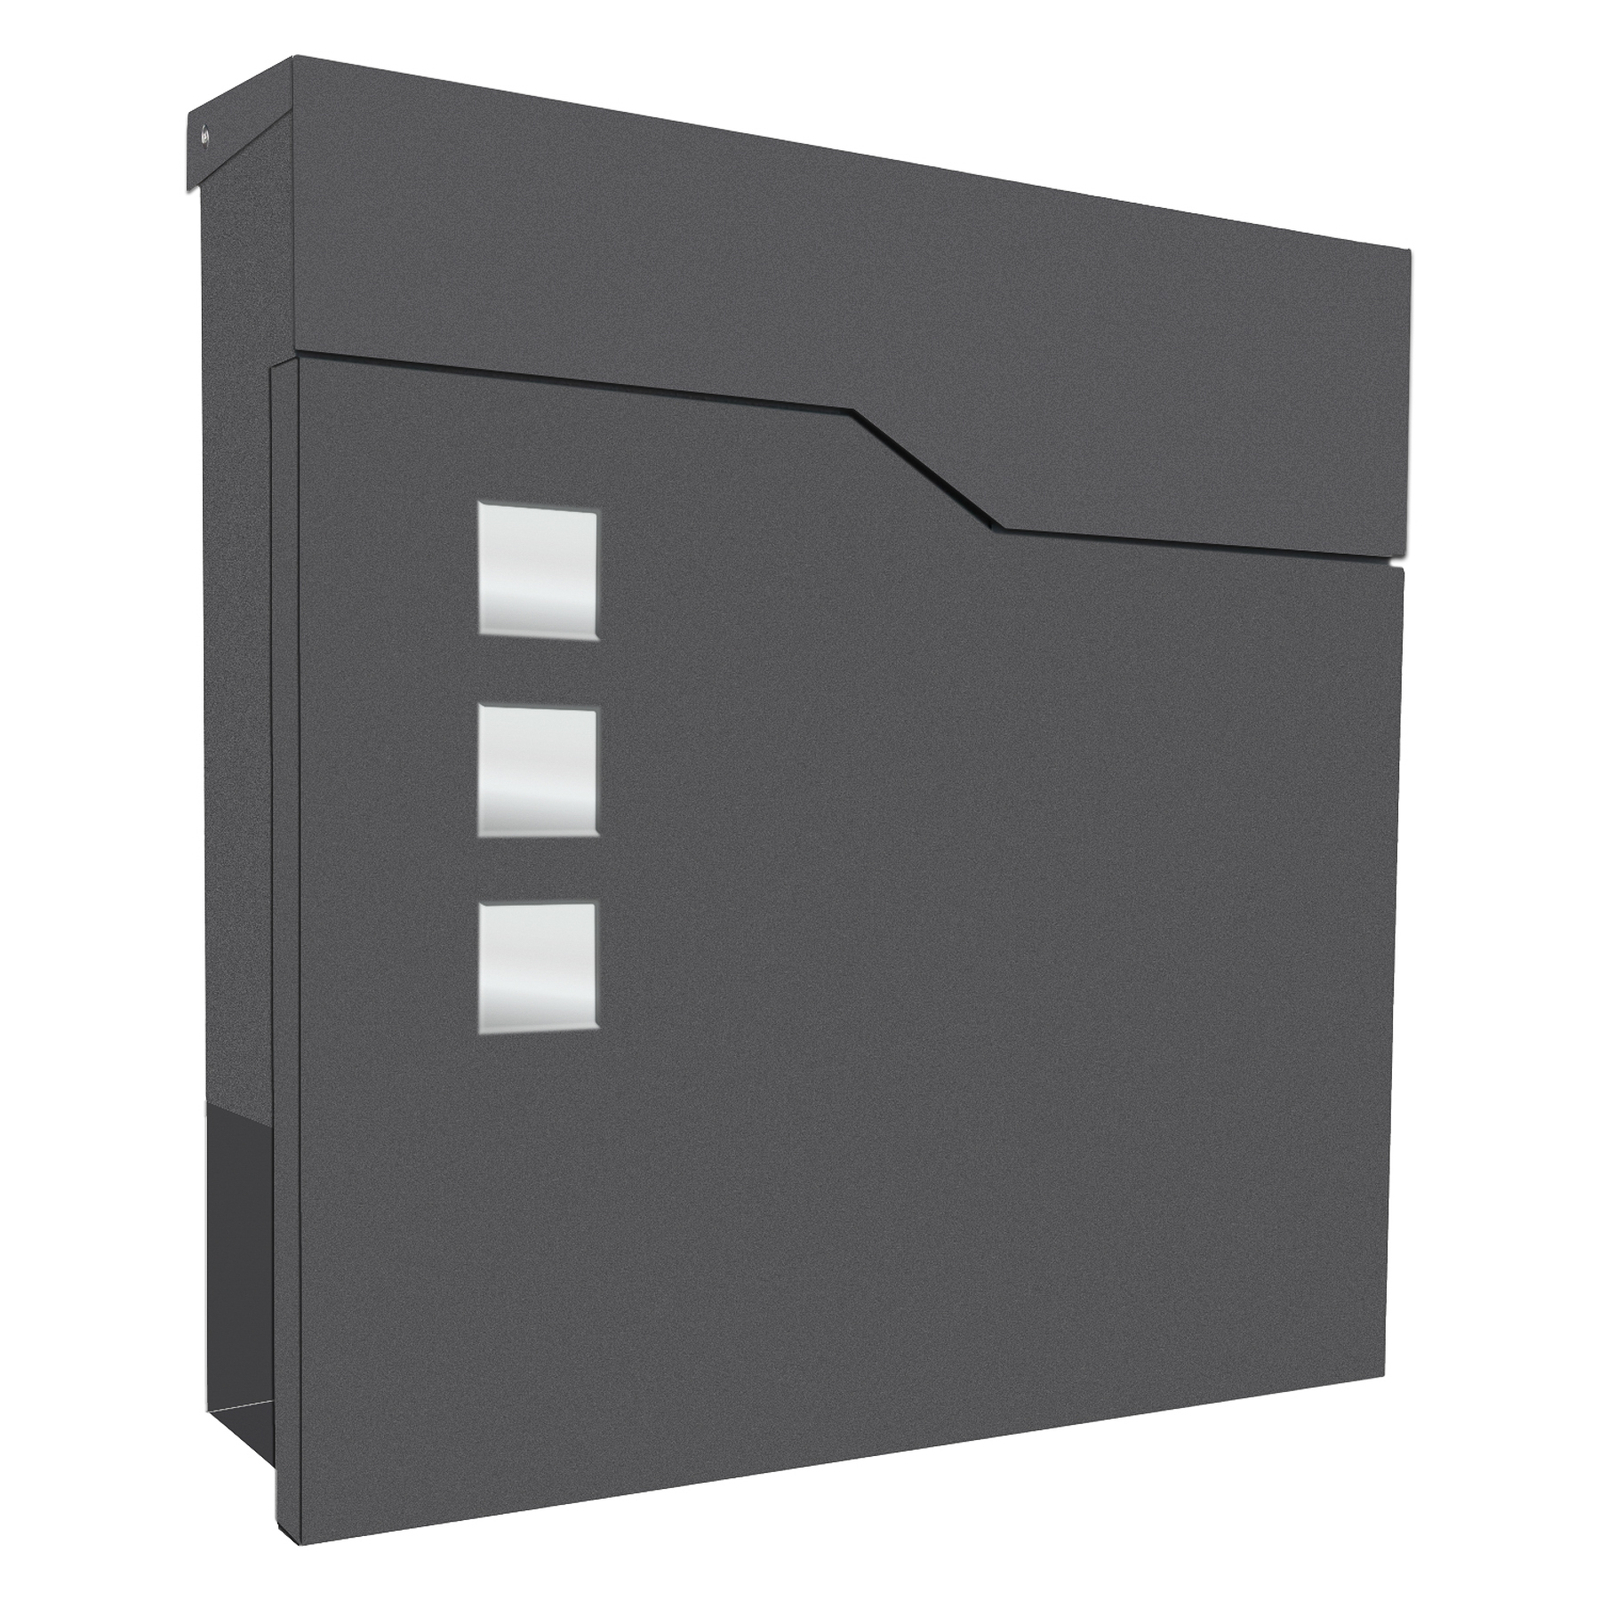 Wall-mounted letterbox 3039, newspaper compartment